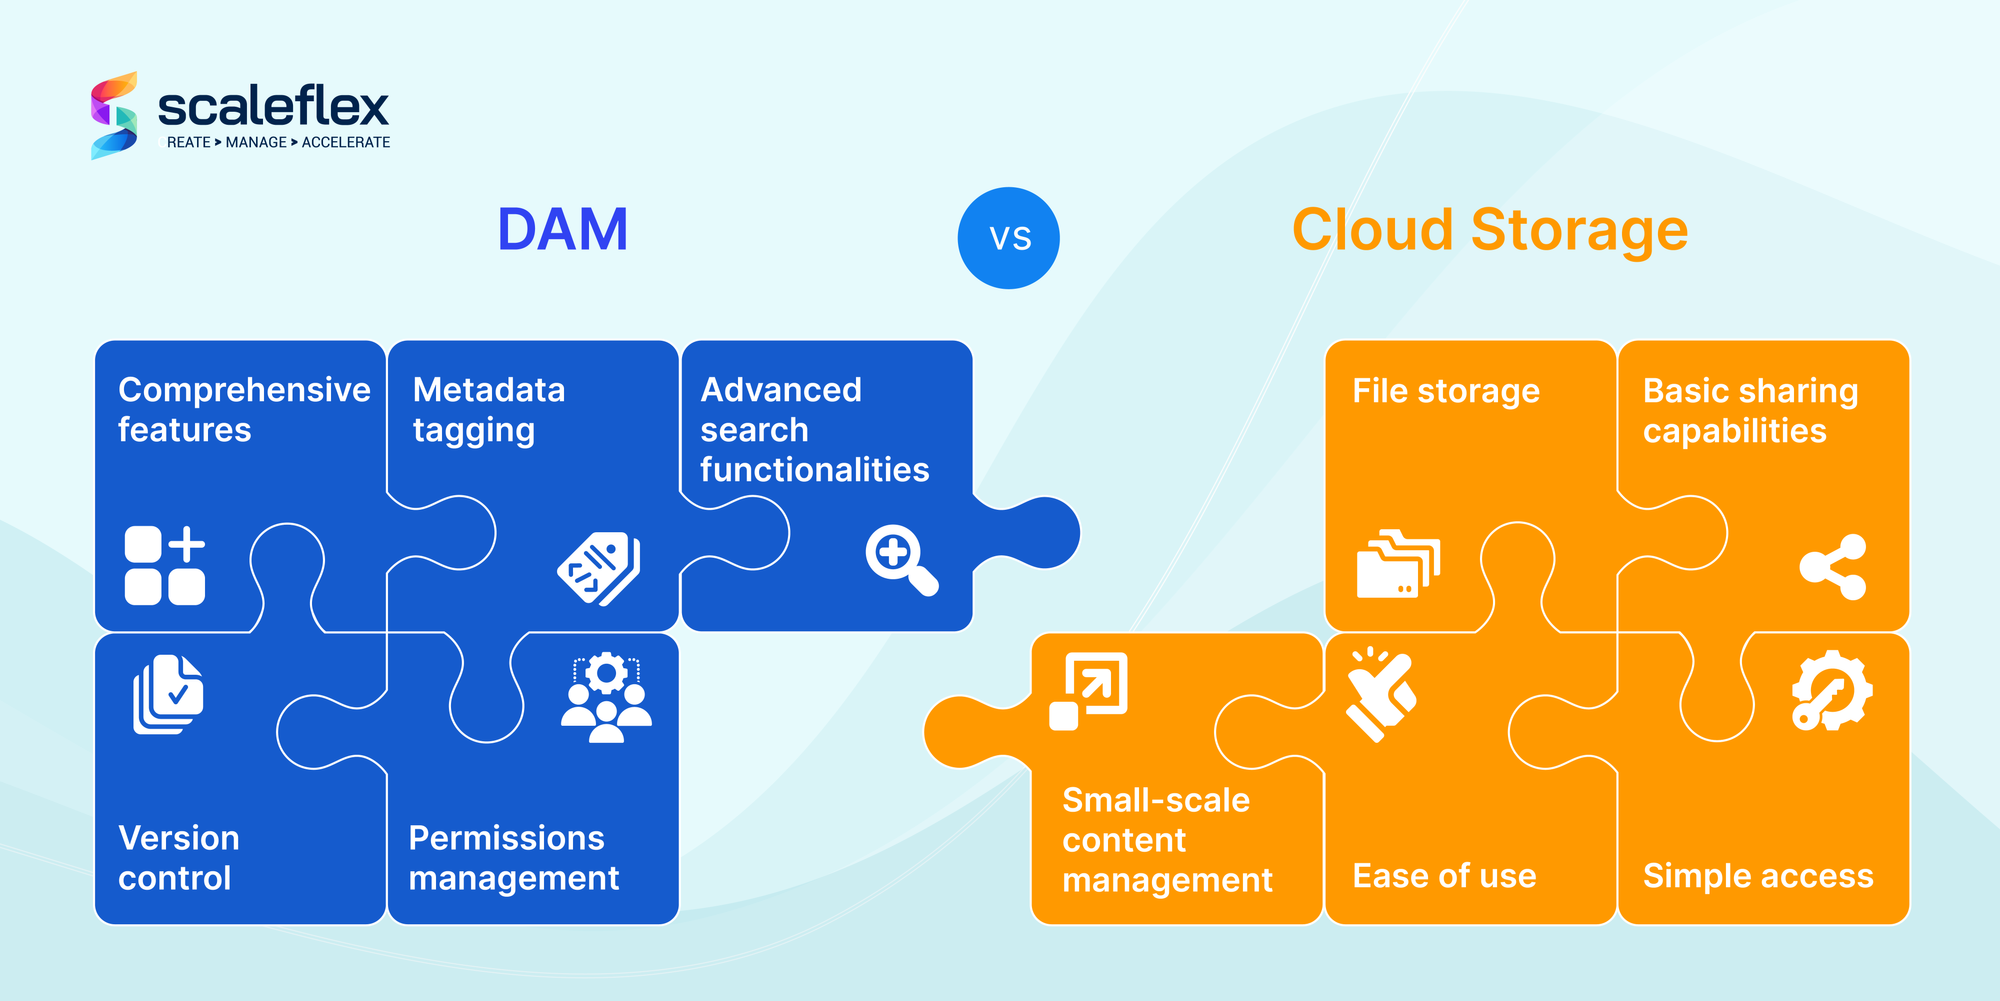 The main differences between DAM and Cloud Storage are expressed through a visual table bearing their main characteristics. 